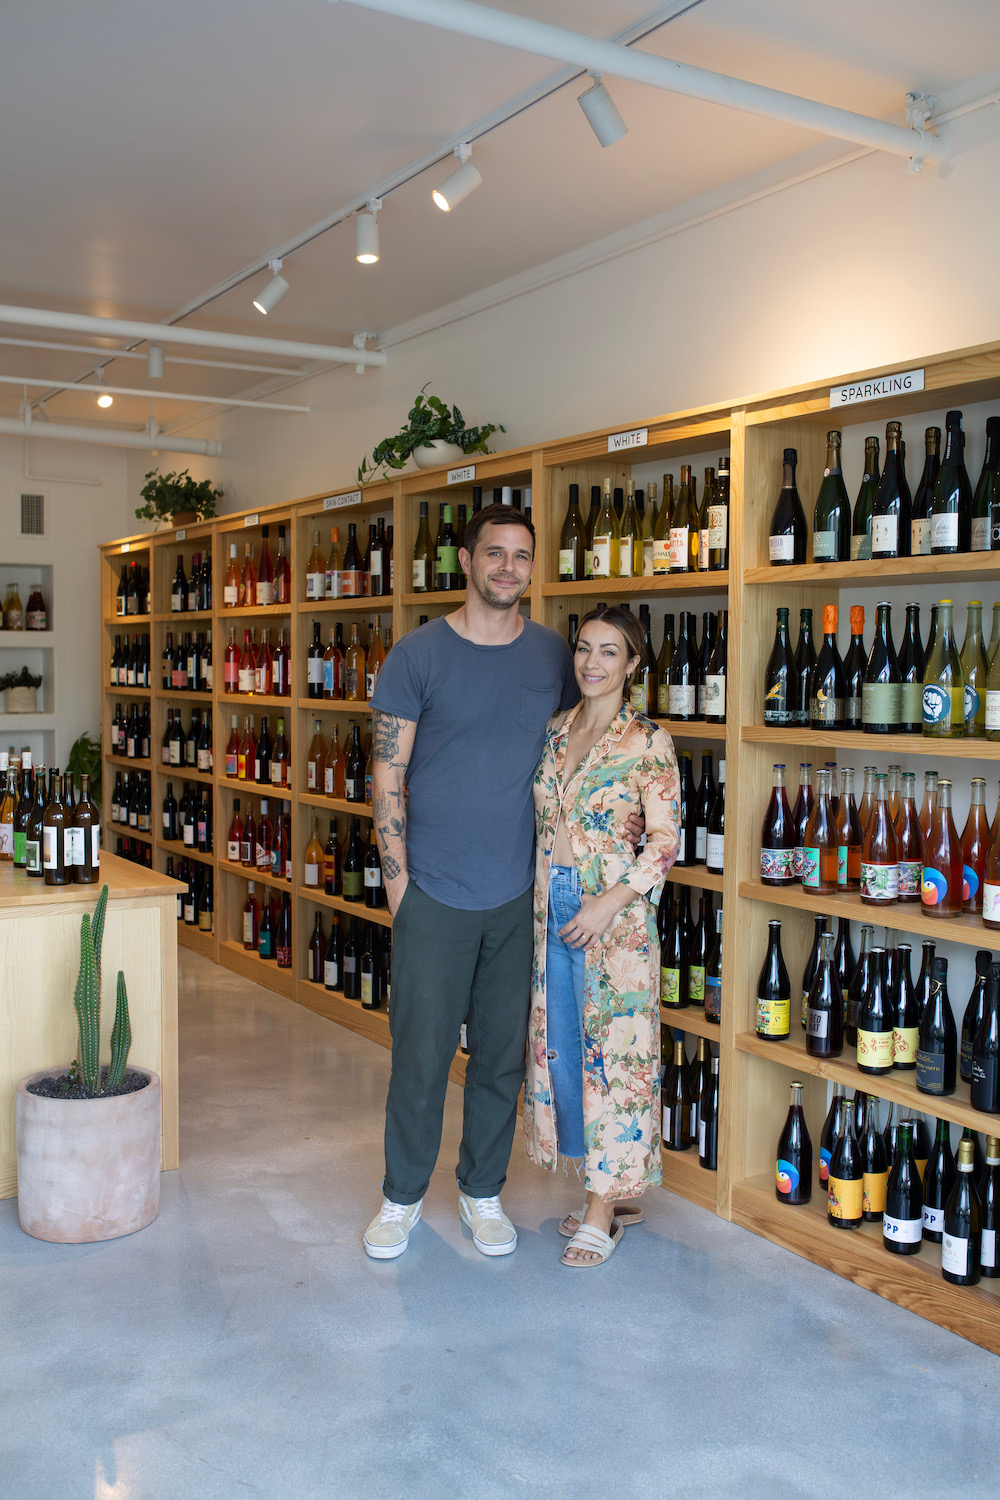 Founders standing infront of wine racks at new natural wine bar Little Victory Wine Market, Jeremy Simpson and Kirsten Potenza, opening in Carlsbad 